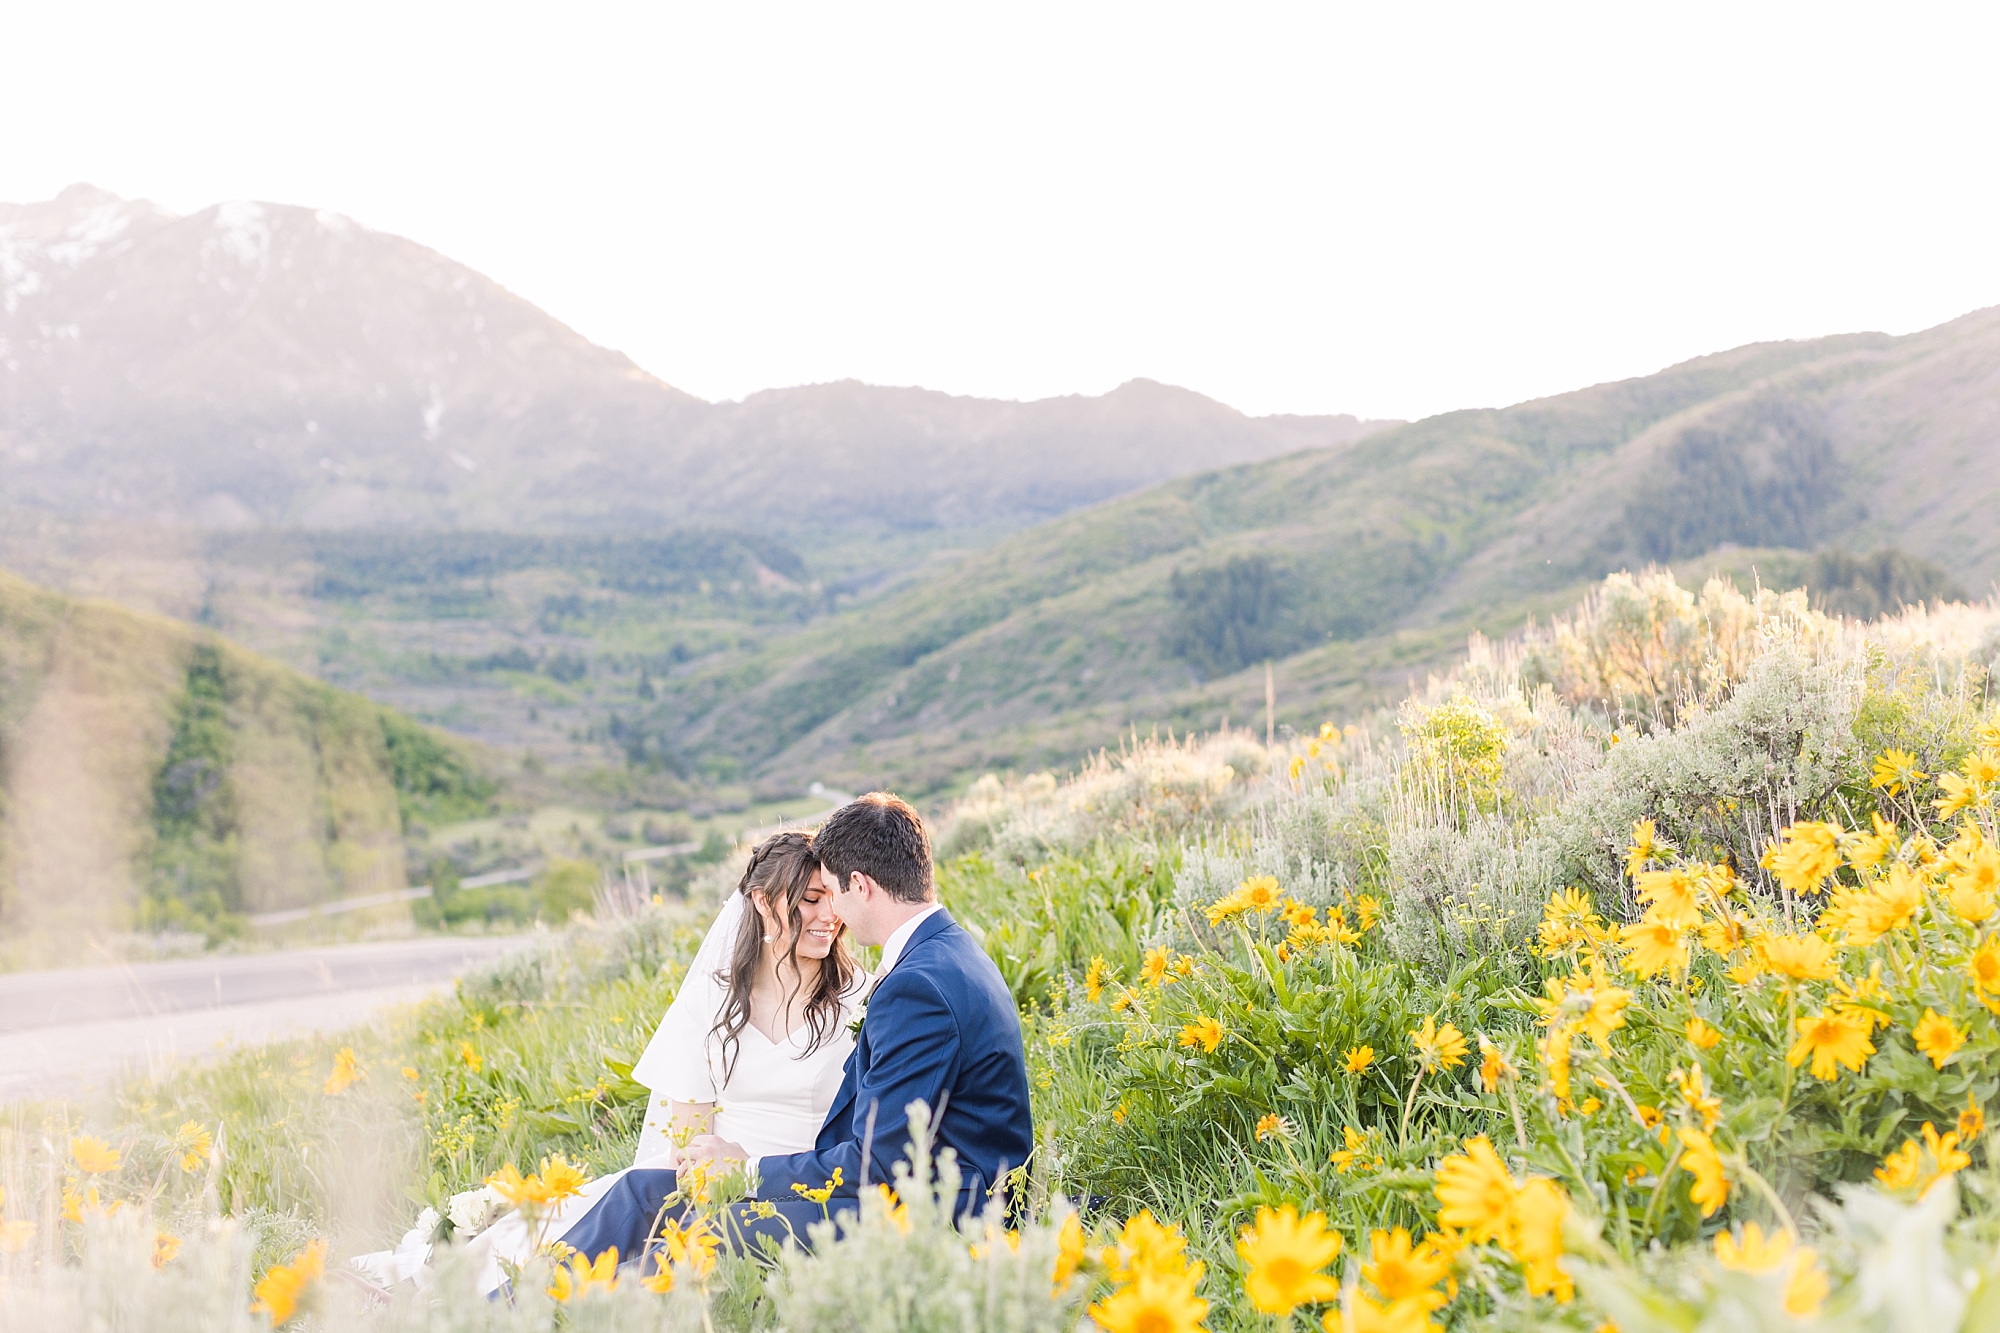 Contact me for your Utah mountains summer formals session with beautiful vibrant yellow wild flowers covering the rolling mountain hills!